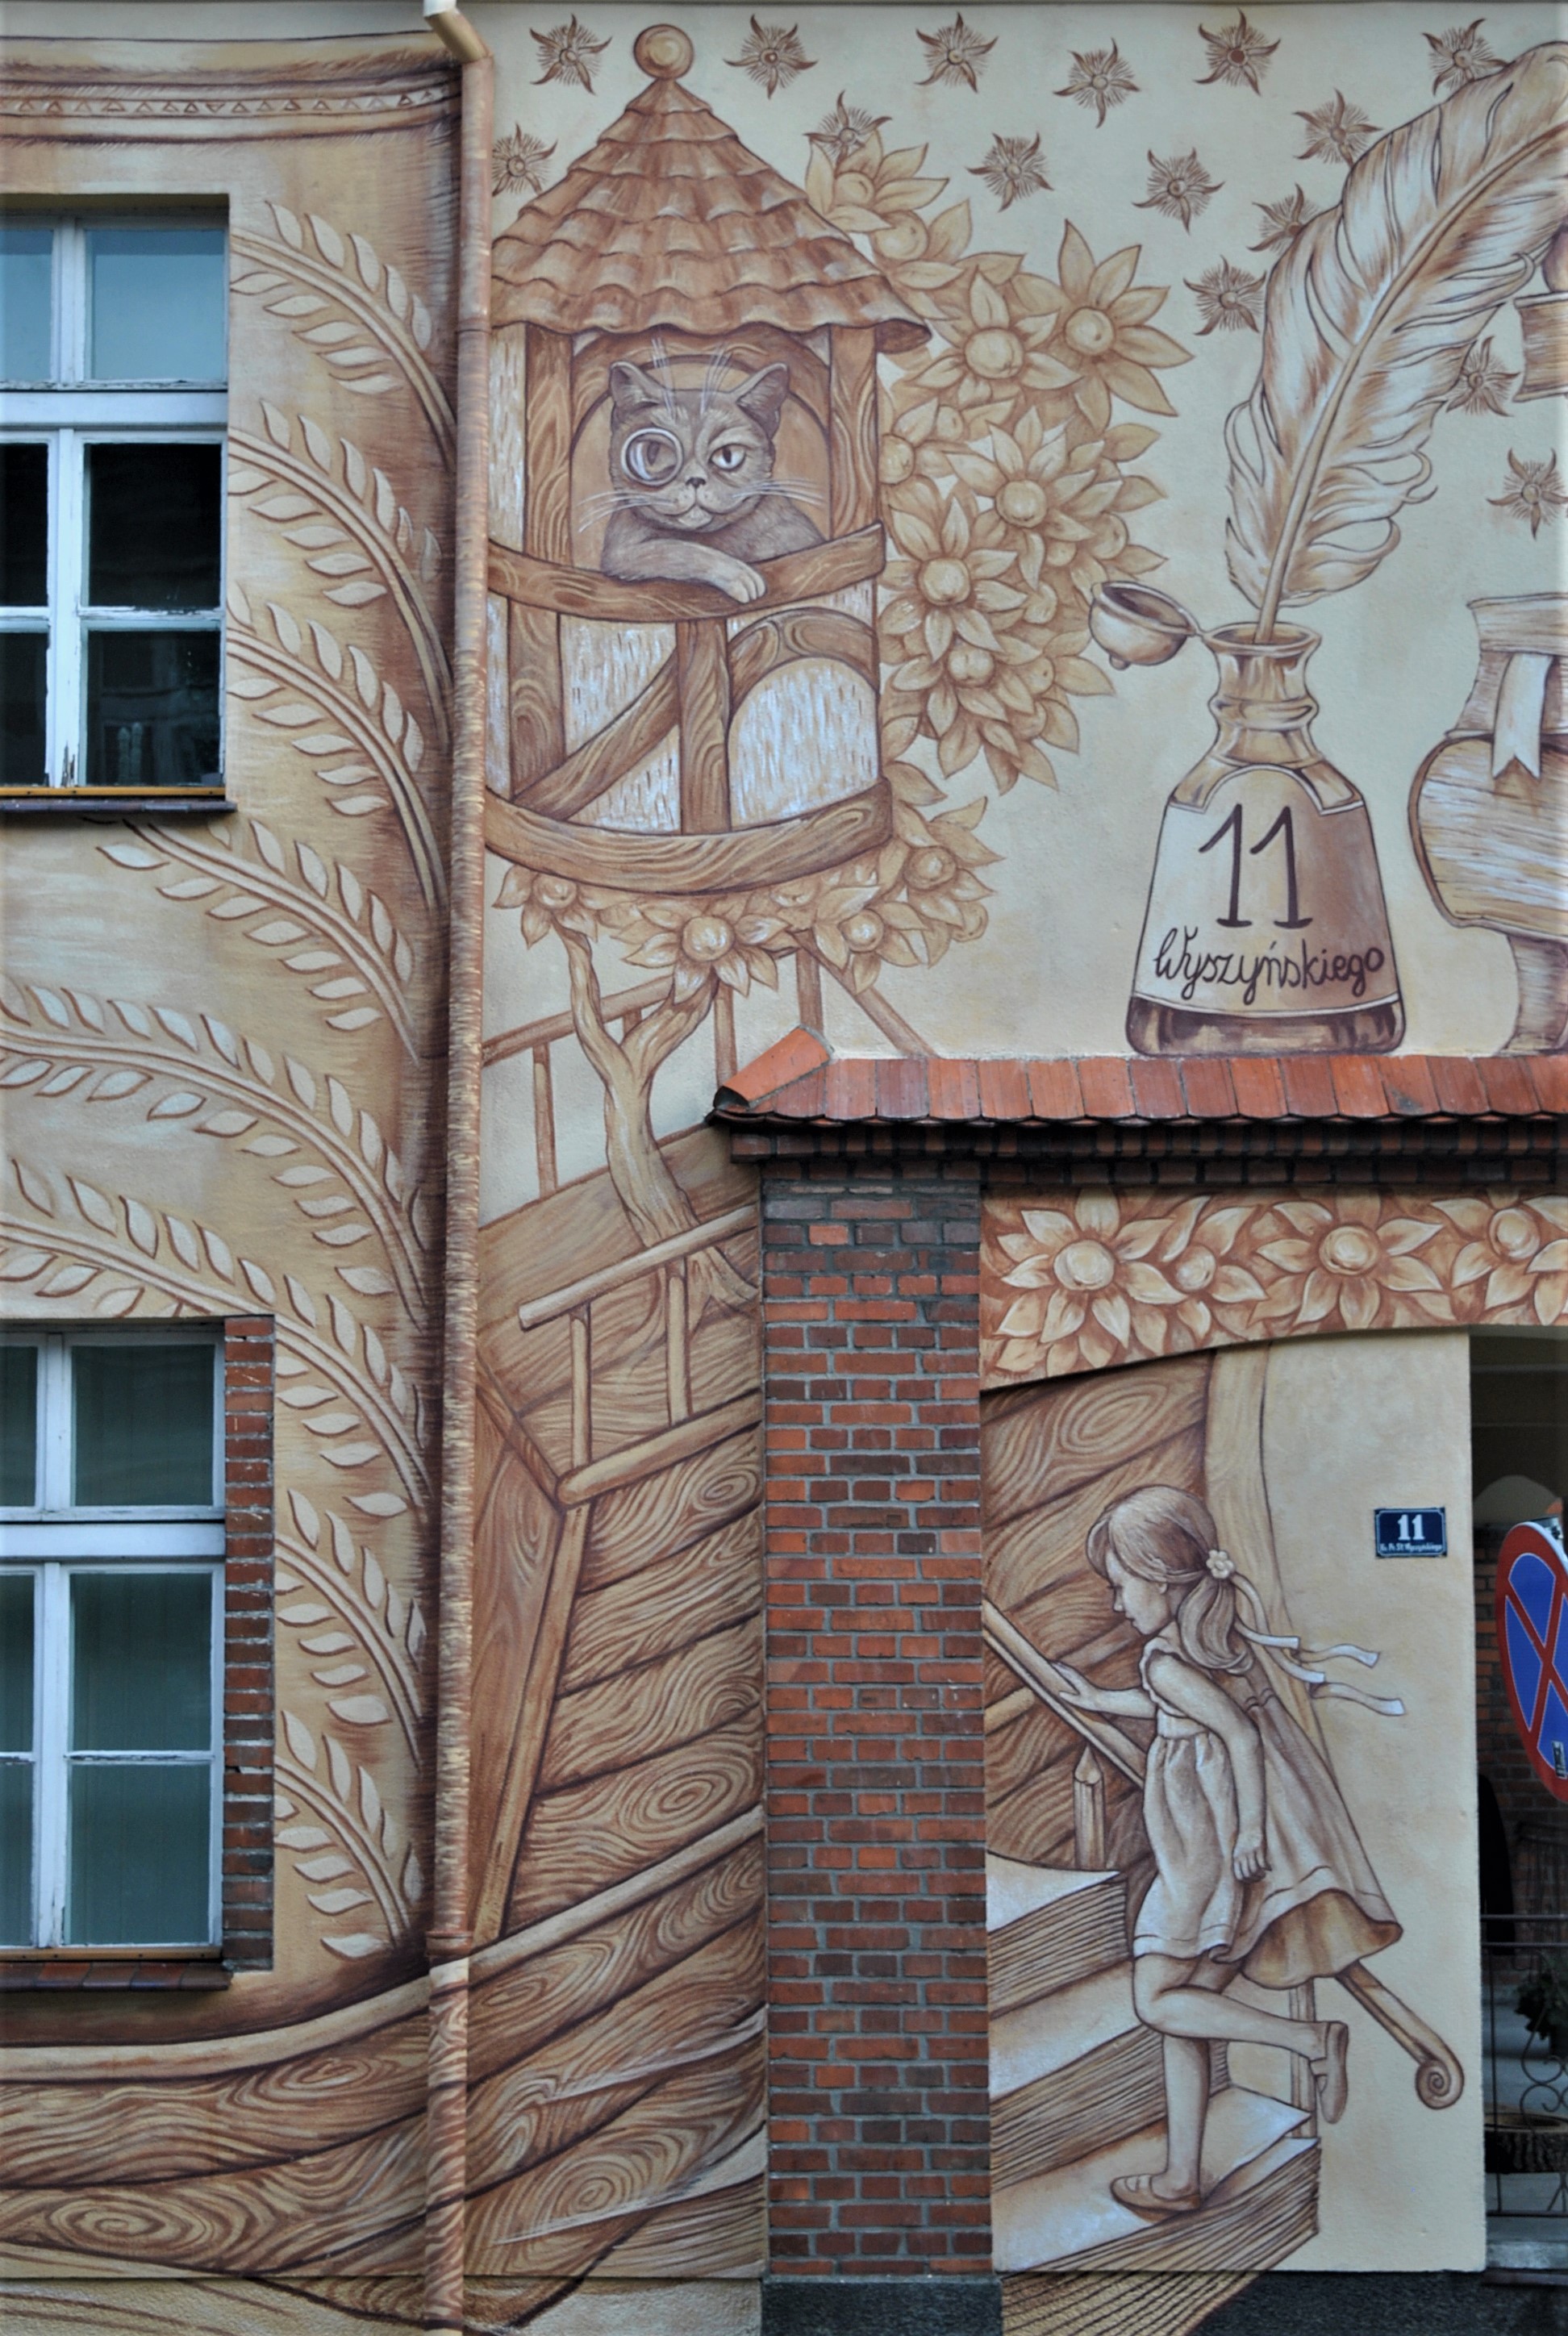 “BOOK ADWENTURES” by Wow Wall Studio in Srem, Poland Artes & contextos book cat